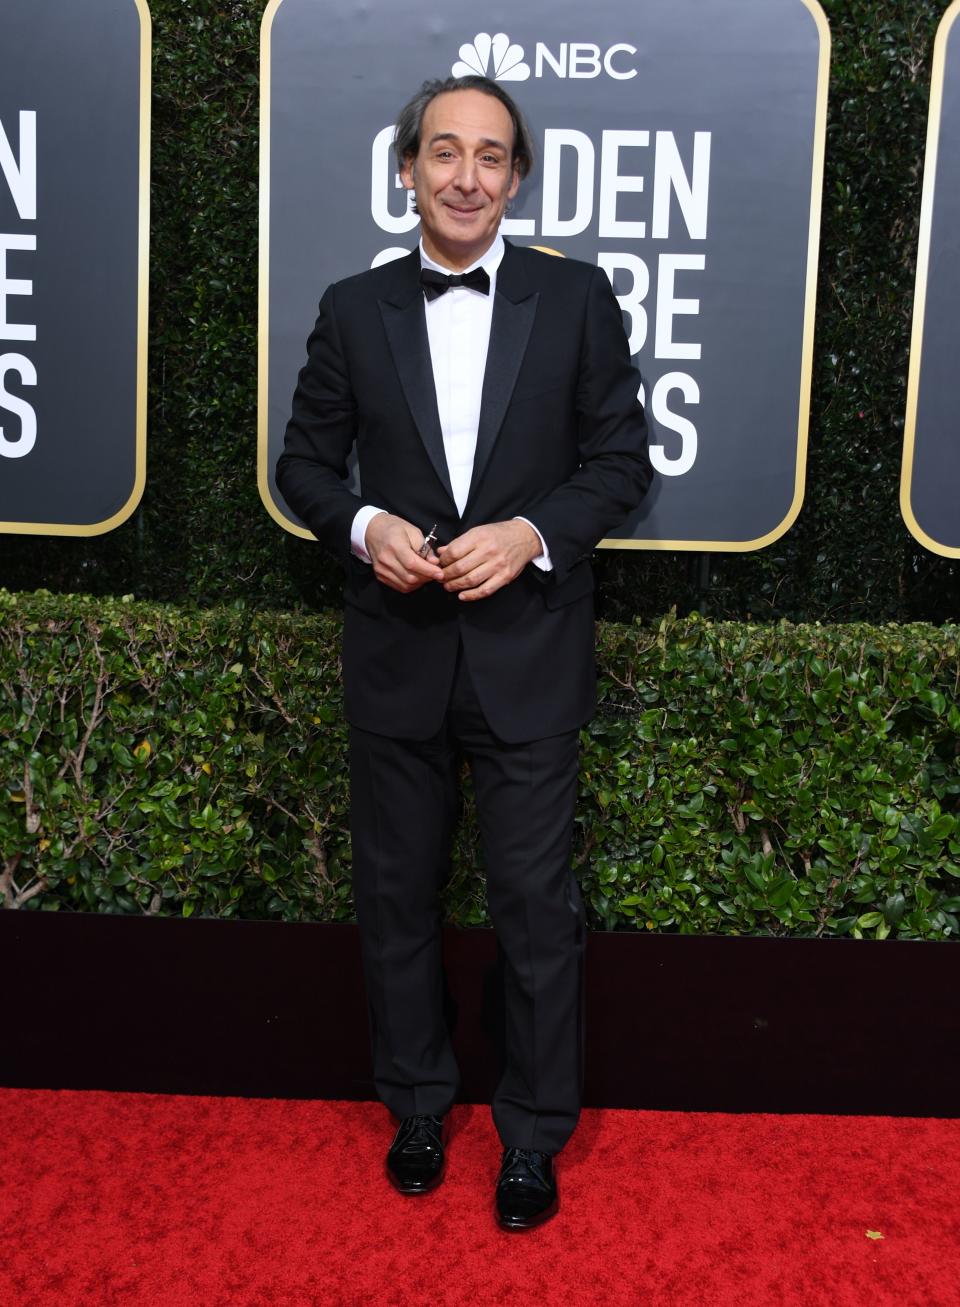 French composer Alexandre Desplat arrives for the 77th annual Golden Globe Awards on January 5, 2020, at The Beverly Hilton hotel in Beverly Hills, California. (Photo by VALERIE MACON / AFP) (Photo by VALERIE MACON/AFP via Getty Images)